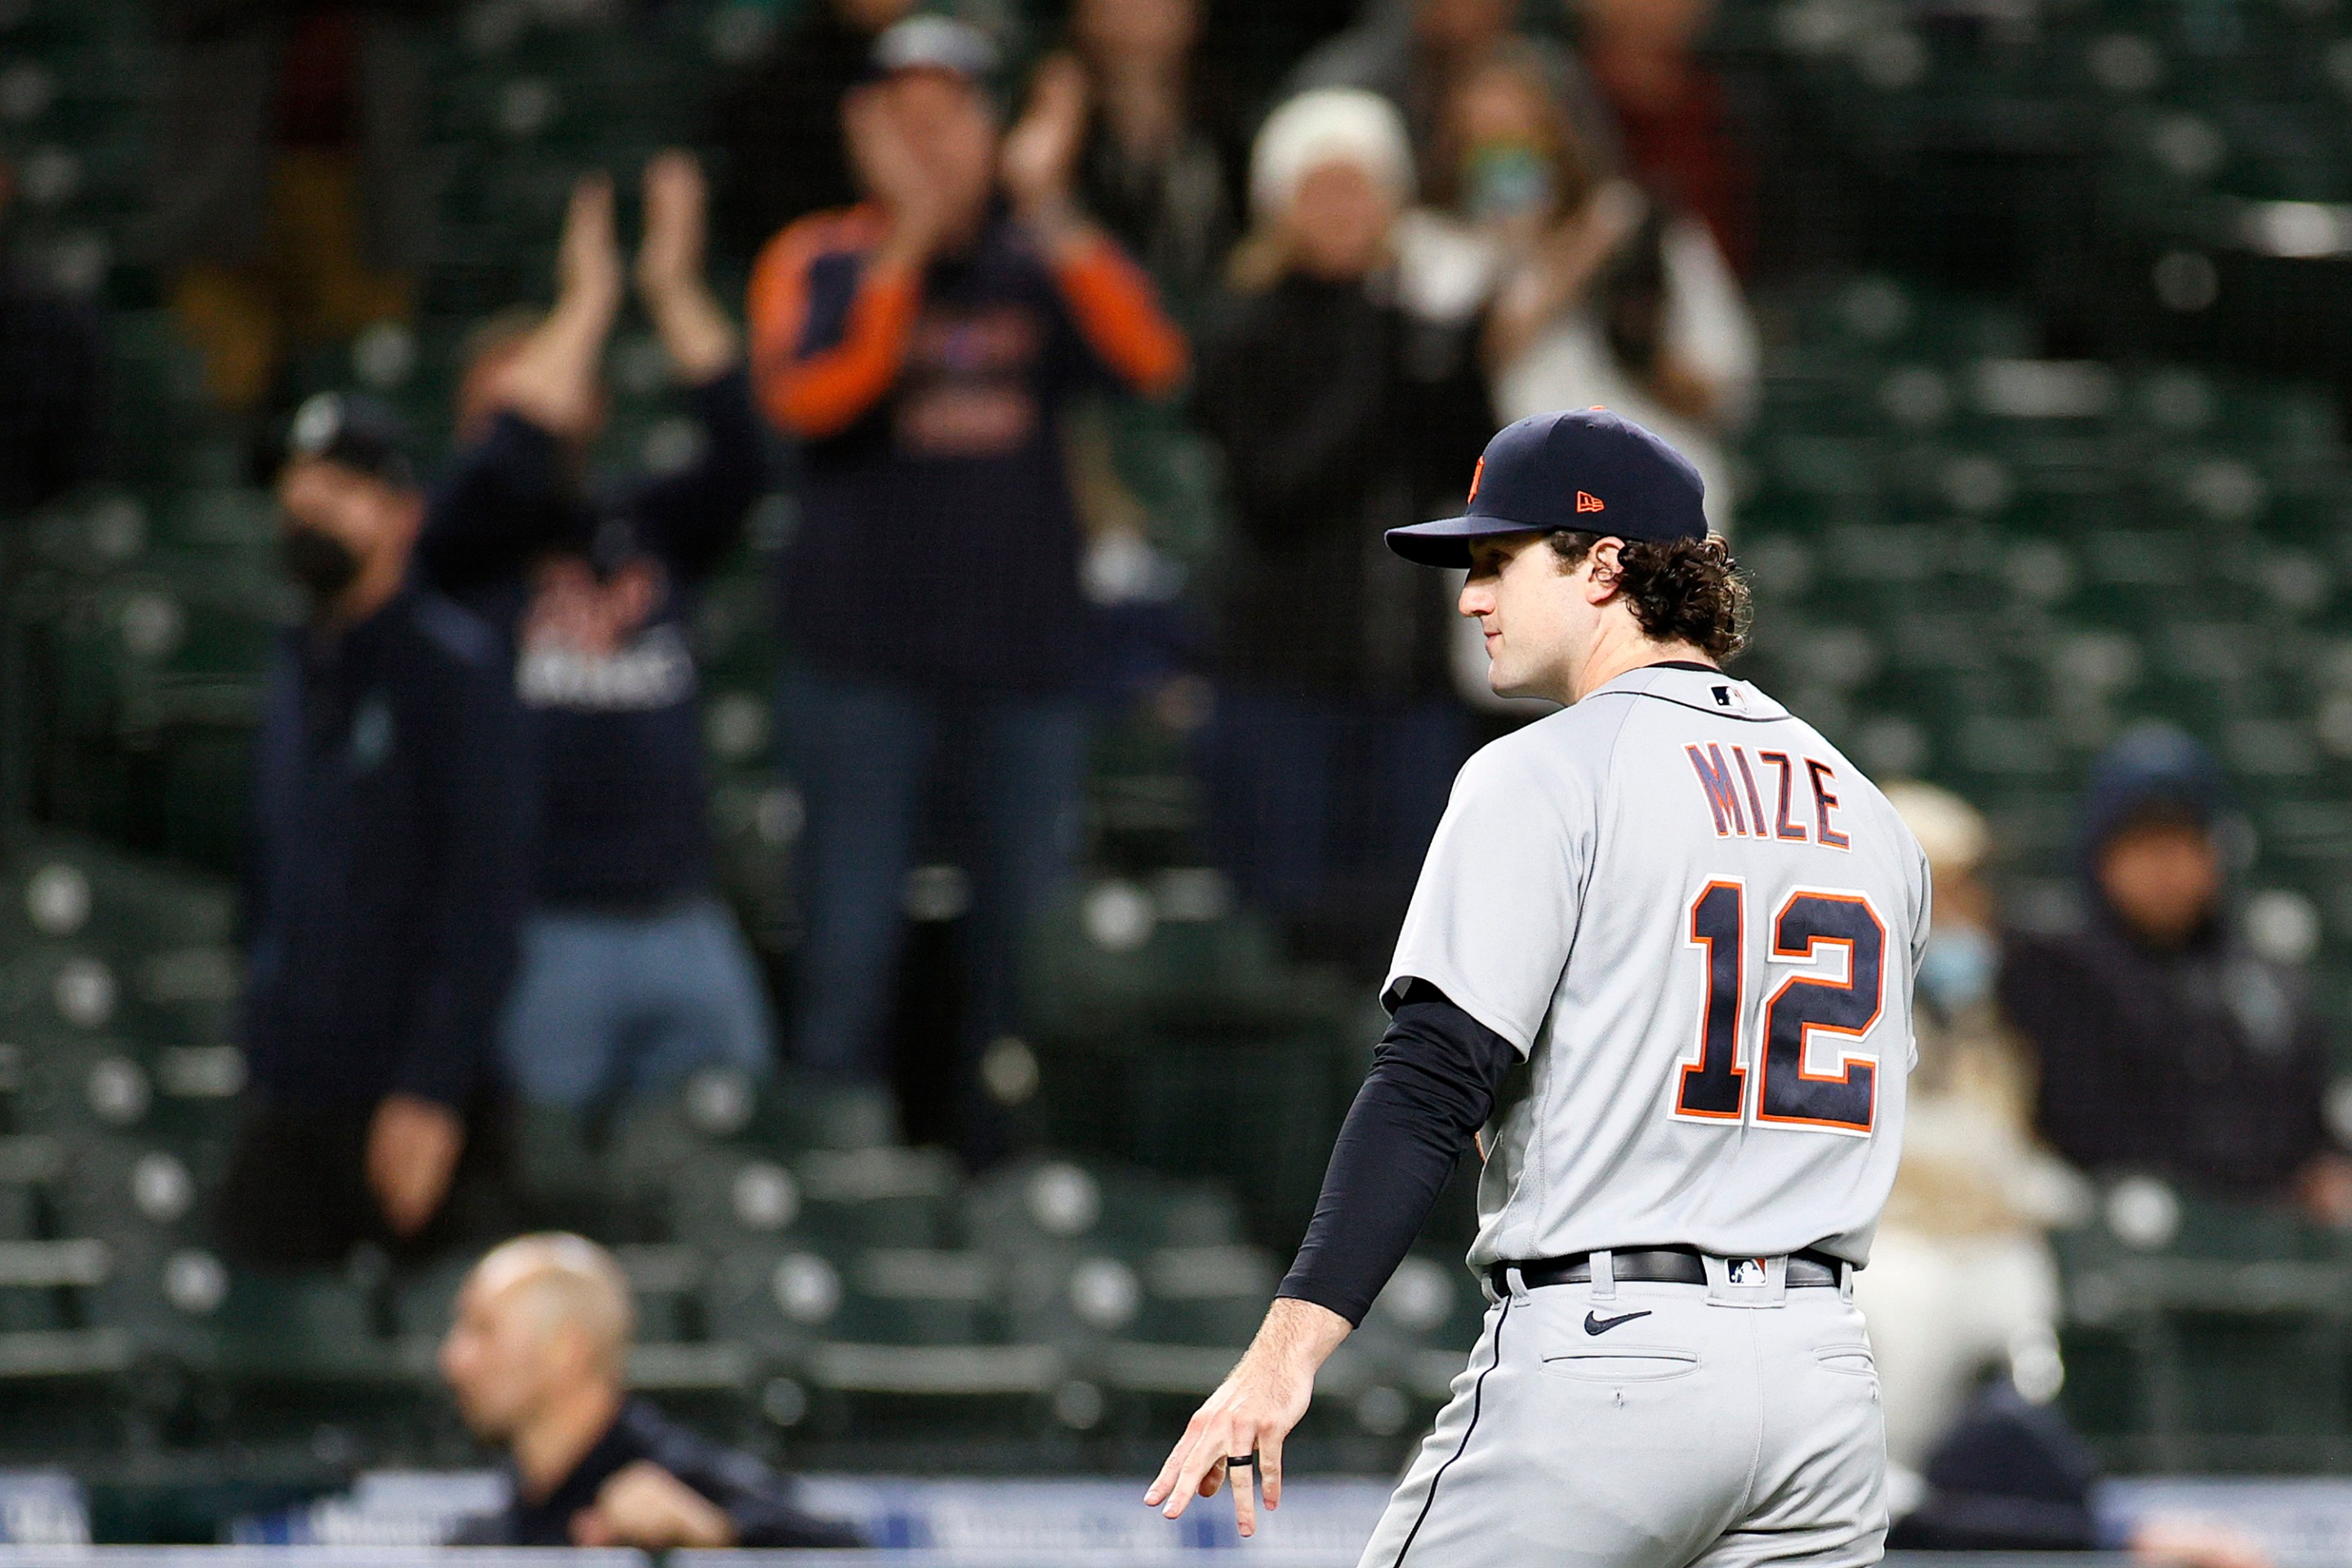 Casey Mize #12 of the Detroit Tigers gestures after he was taken out of the game during the eighth inning against the Seattle Mariners at T-Mobile Park on May 17, 2021 in Seattle, Washington.